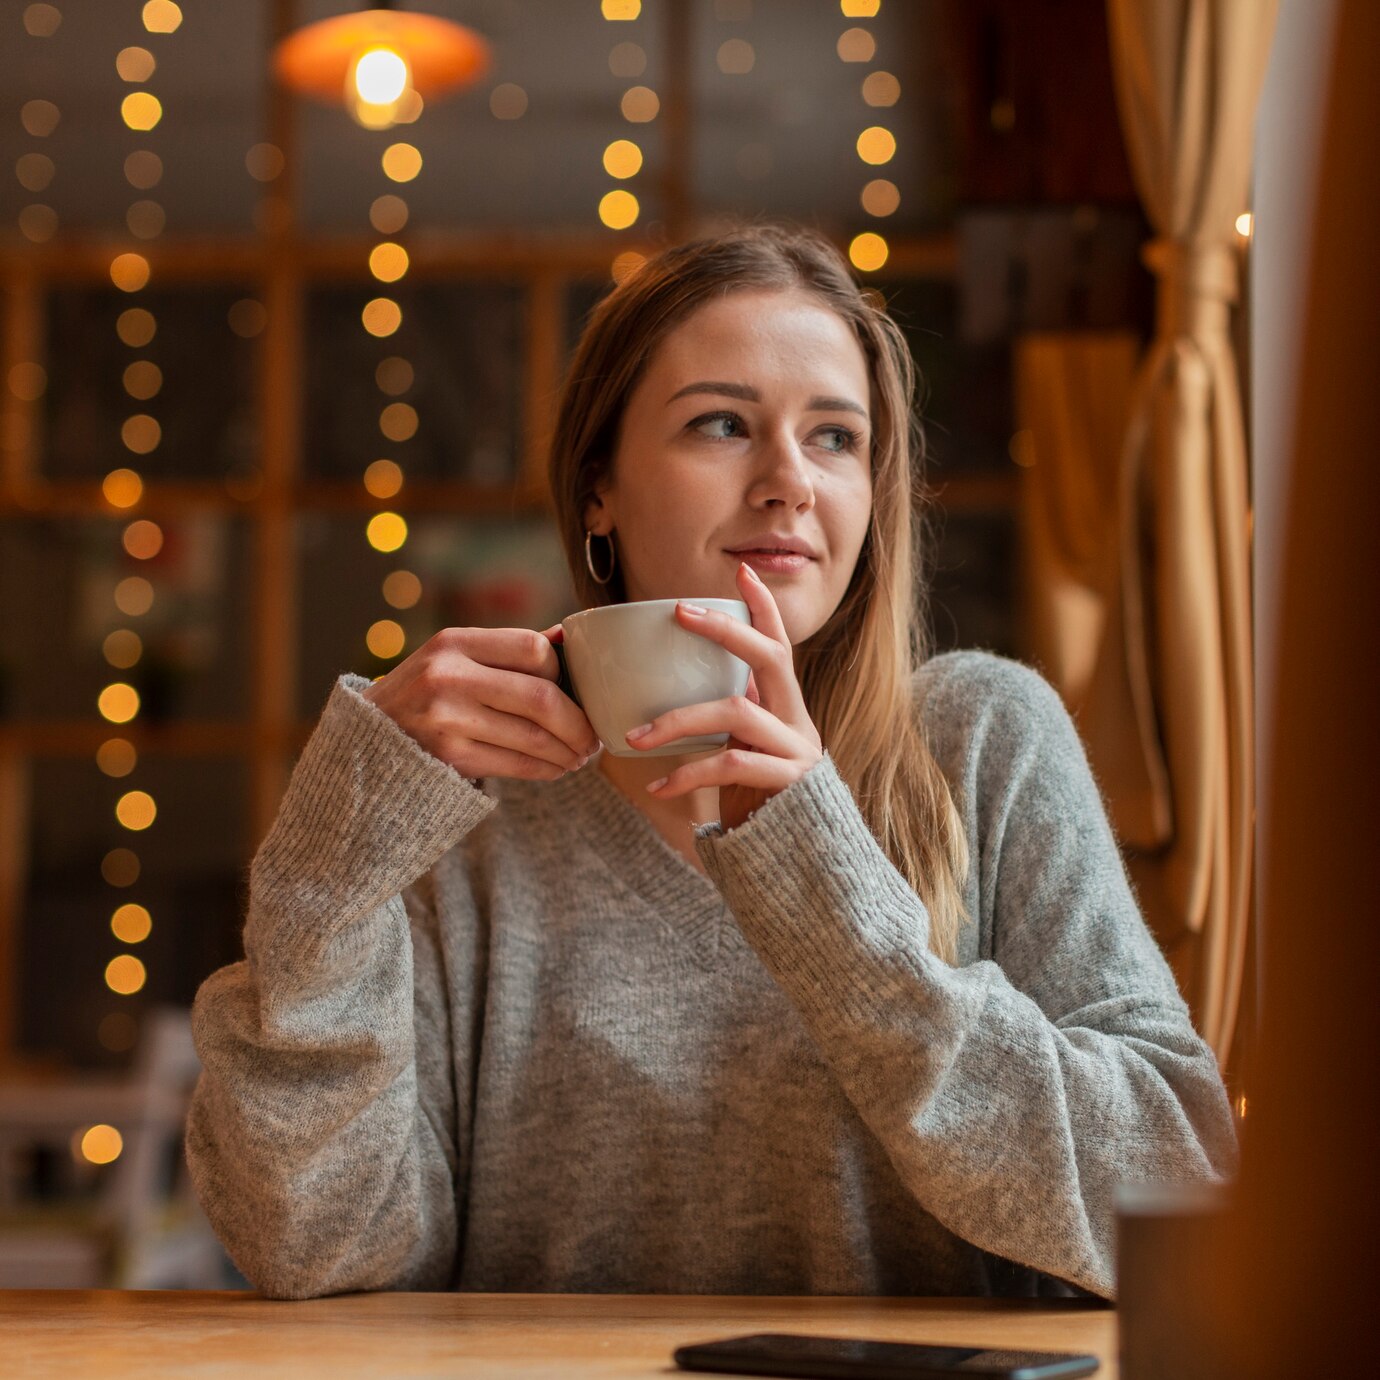 Beautiful girl sitting in a cafe holding a cup of coffee against a blurred background of fairy lights enjoying coffee in an unexplored cafe